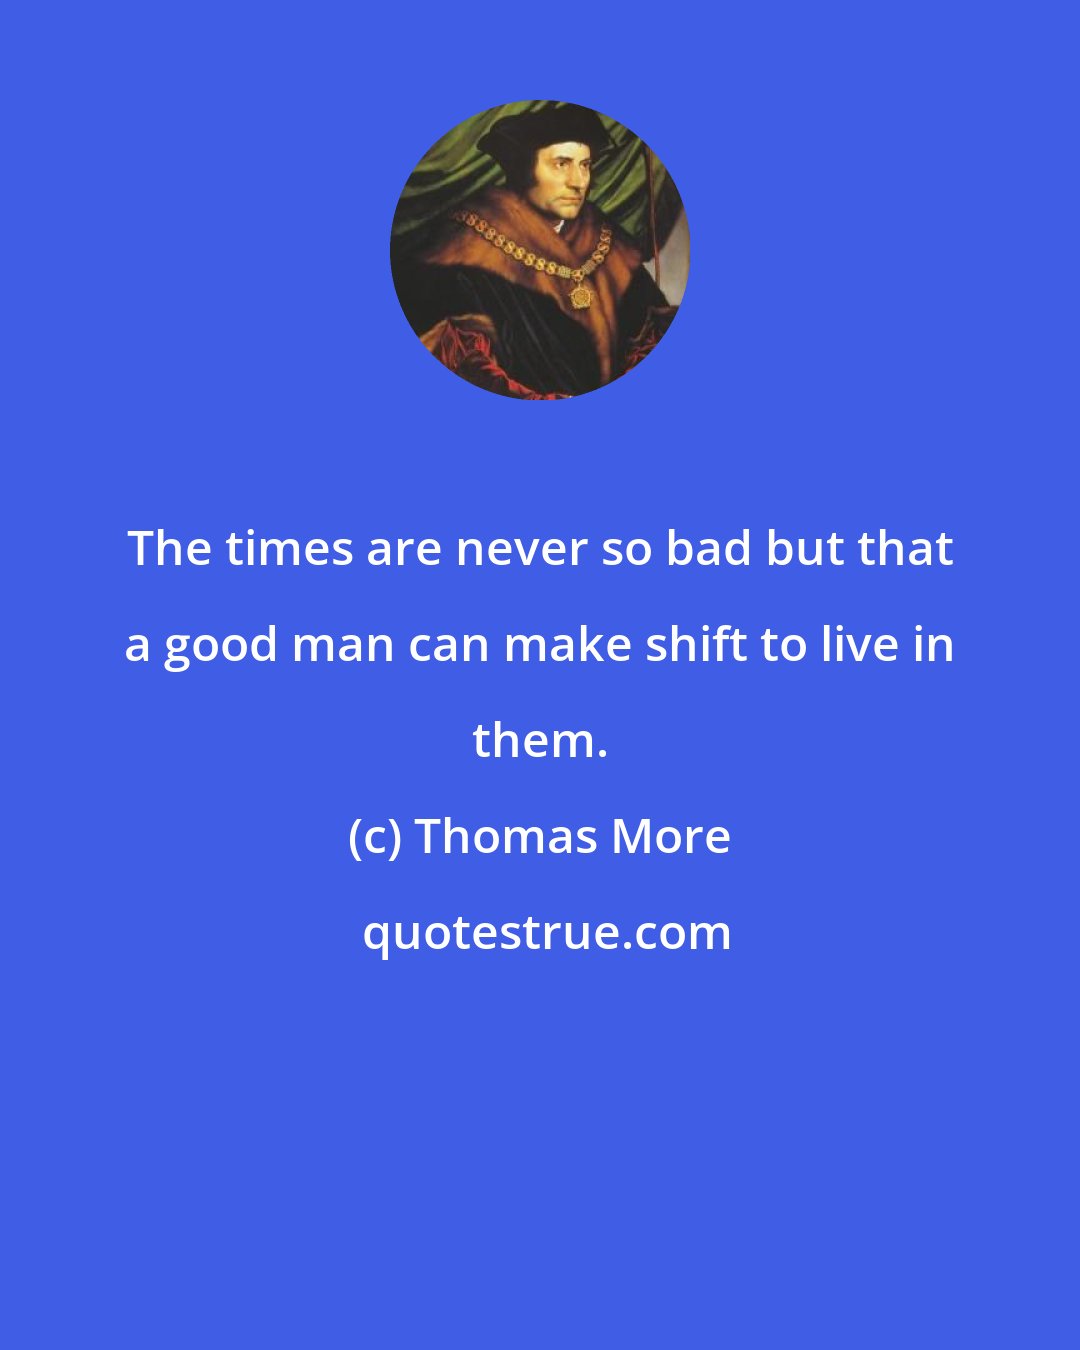 Thomas More: The times are never so bad but that a good man can make shift to live in them.